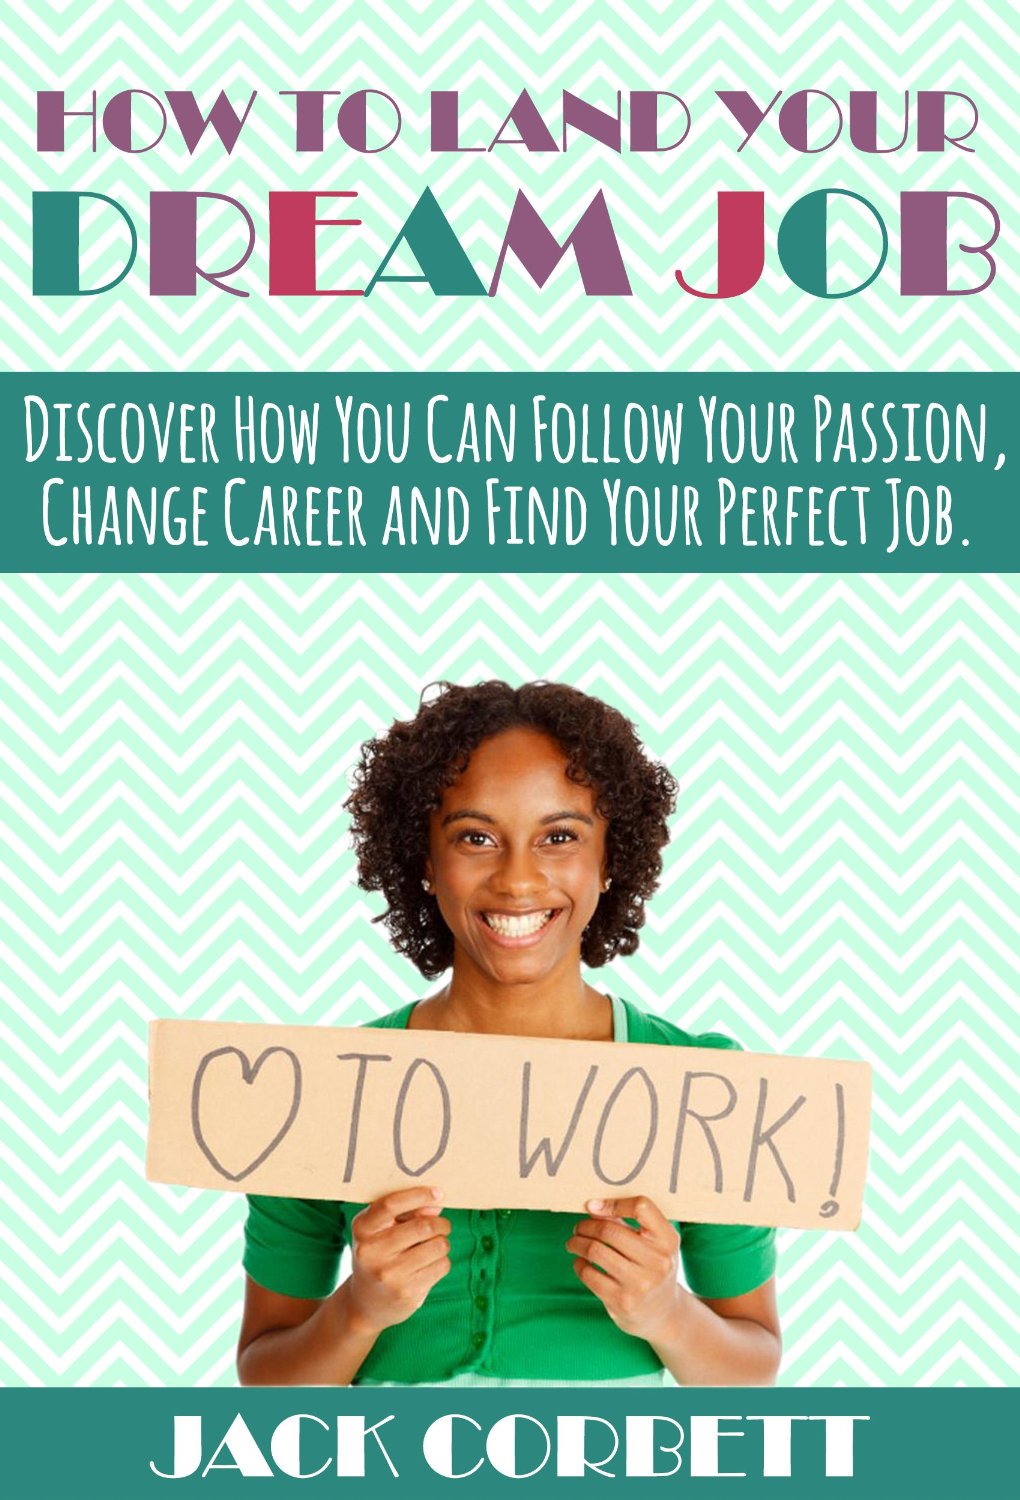 How to Land Your Dream Job: Discover How You Can Follow Your Passion, Change Career and Find Your Perfect Job. by Jack Corbett